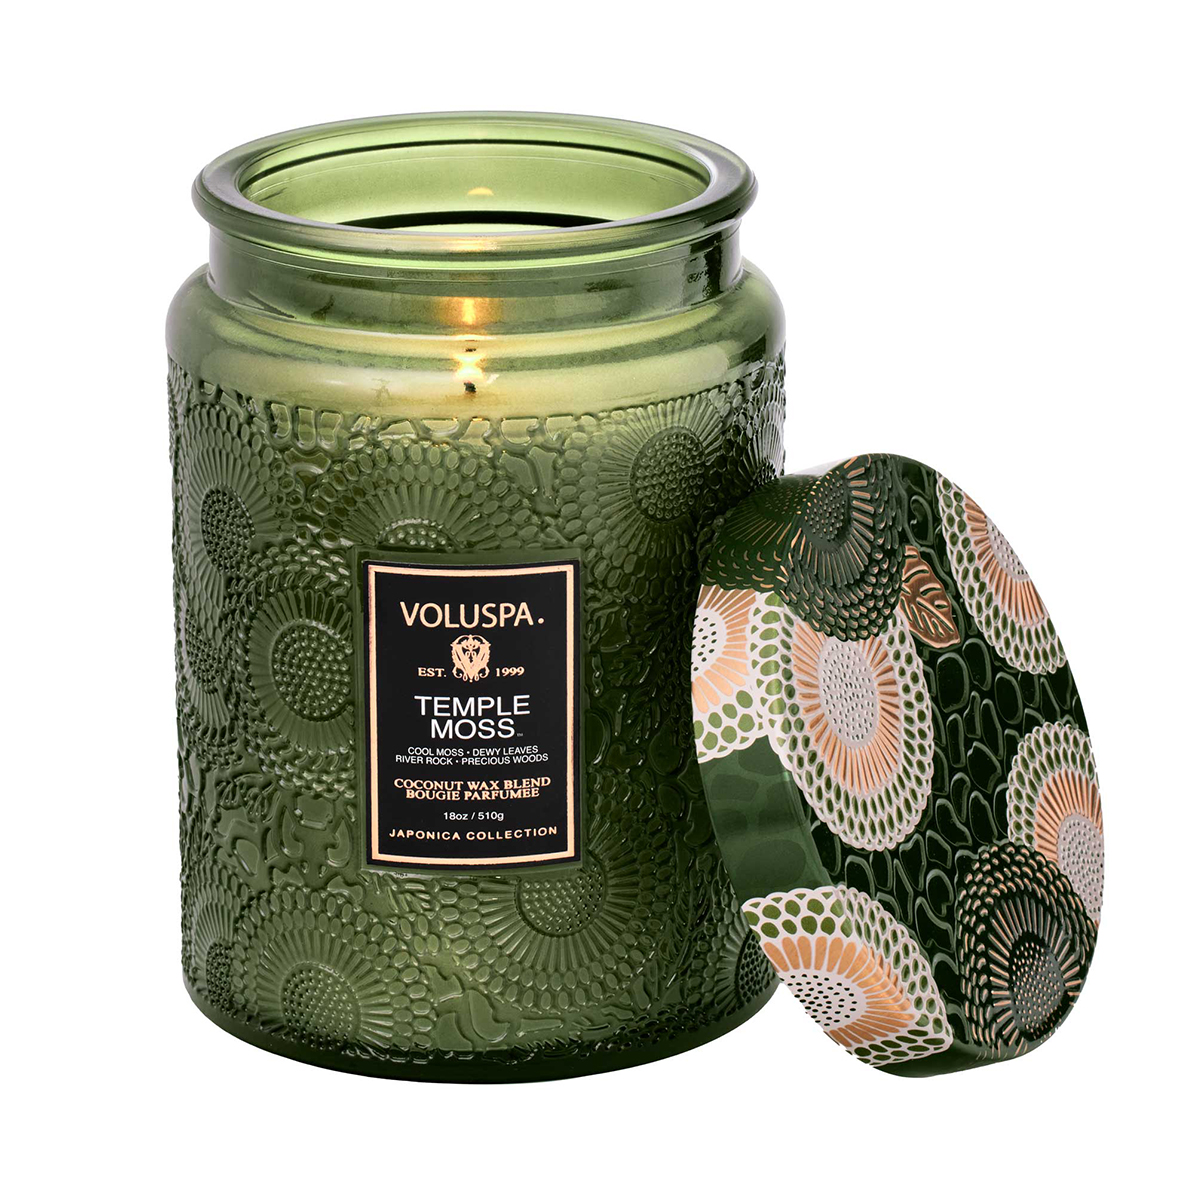 TEMPLE MOSS SCENTED CANDLE IN LARGE JAR